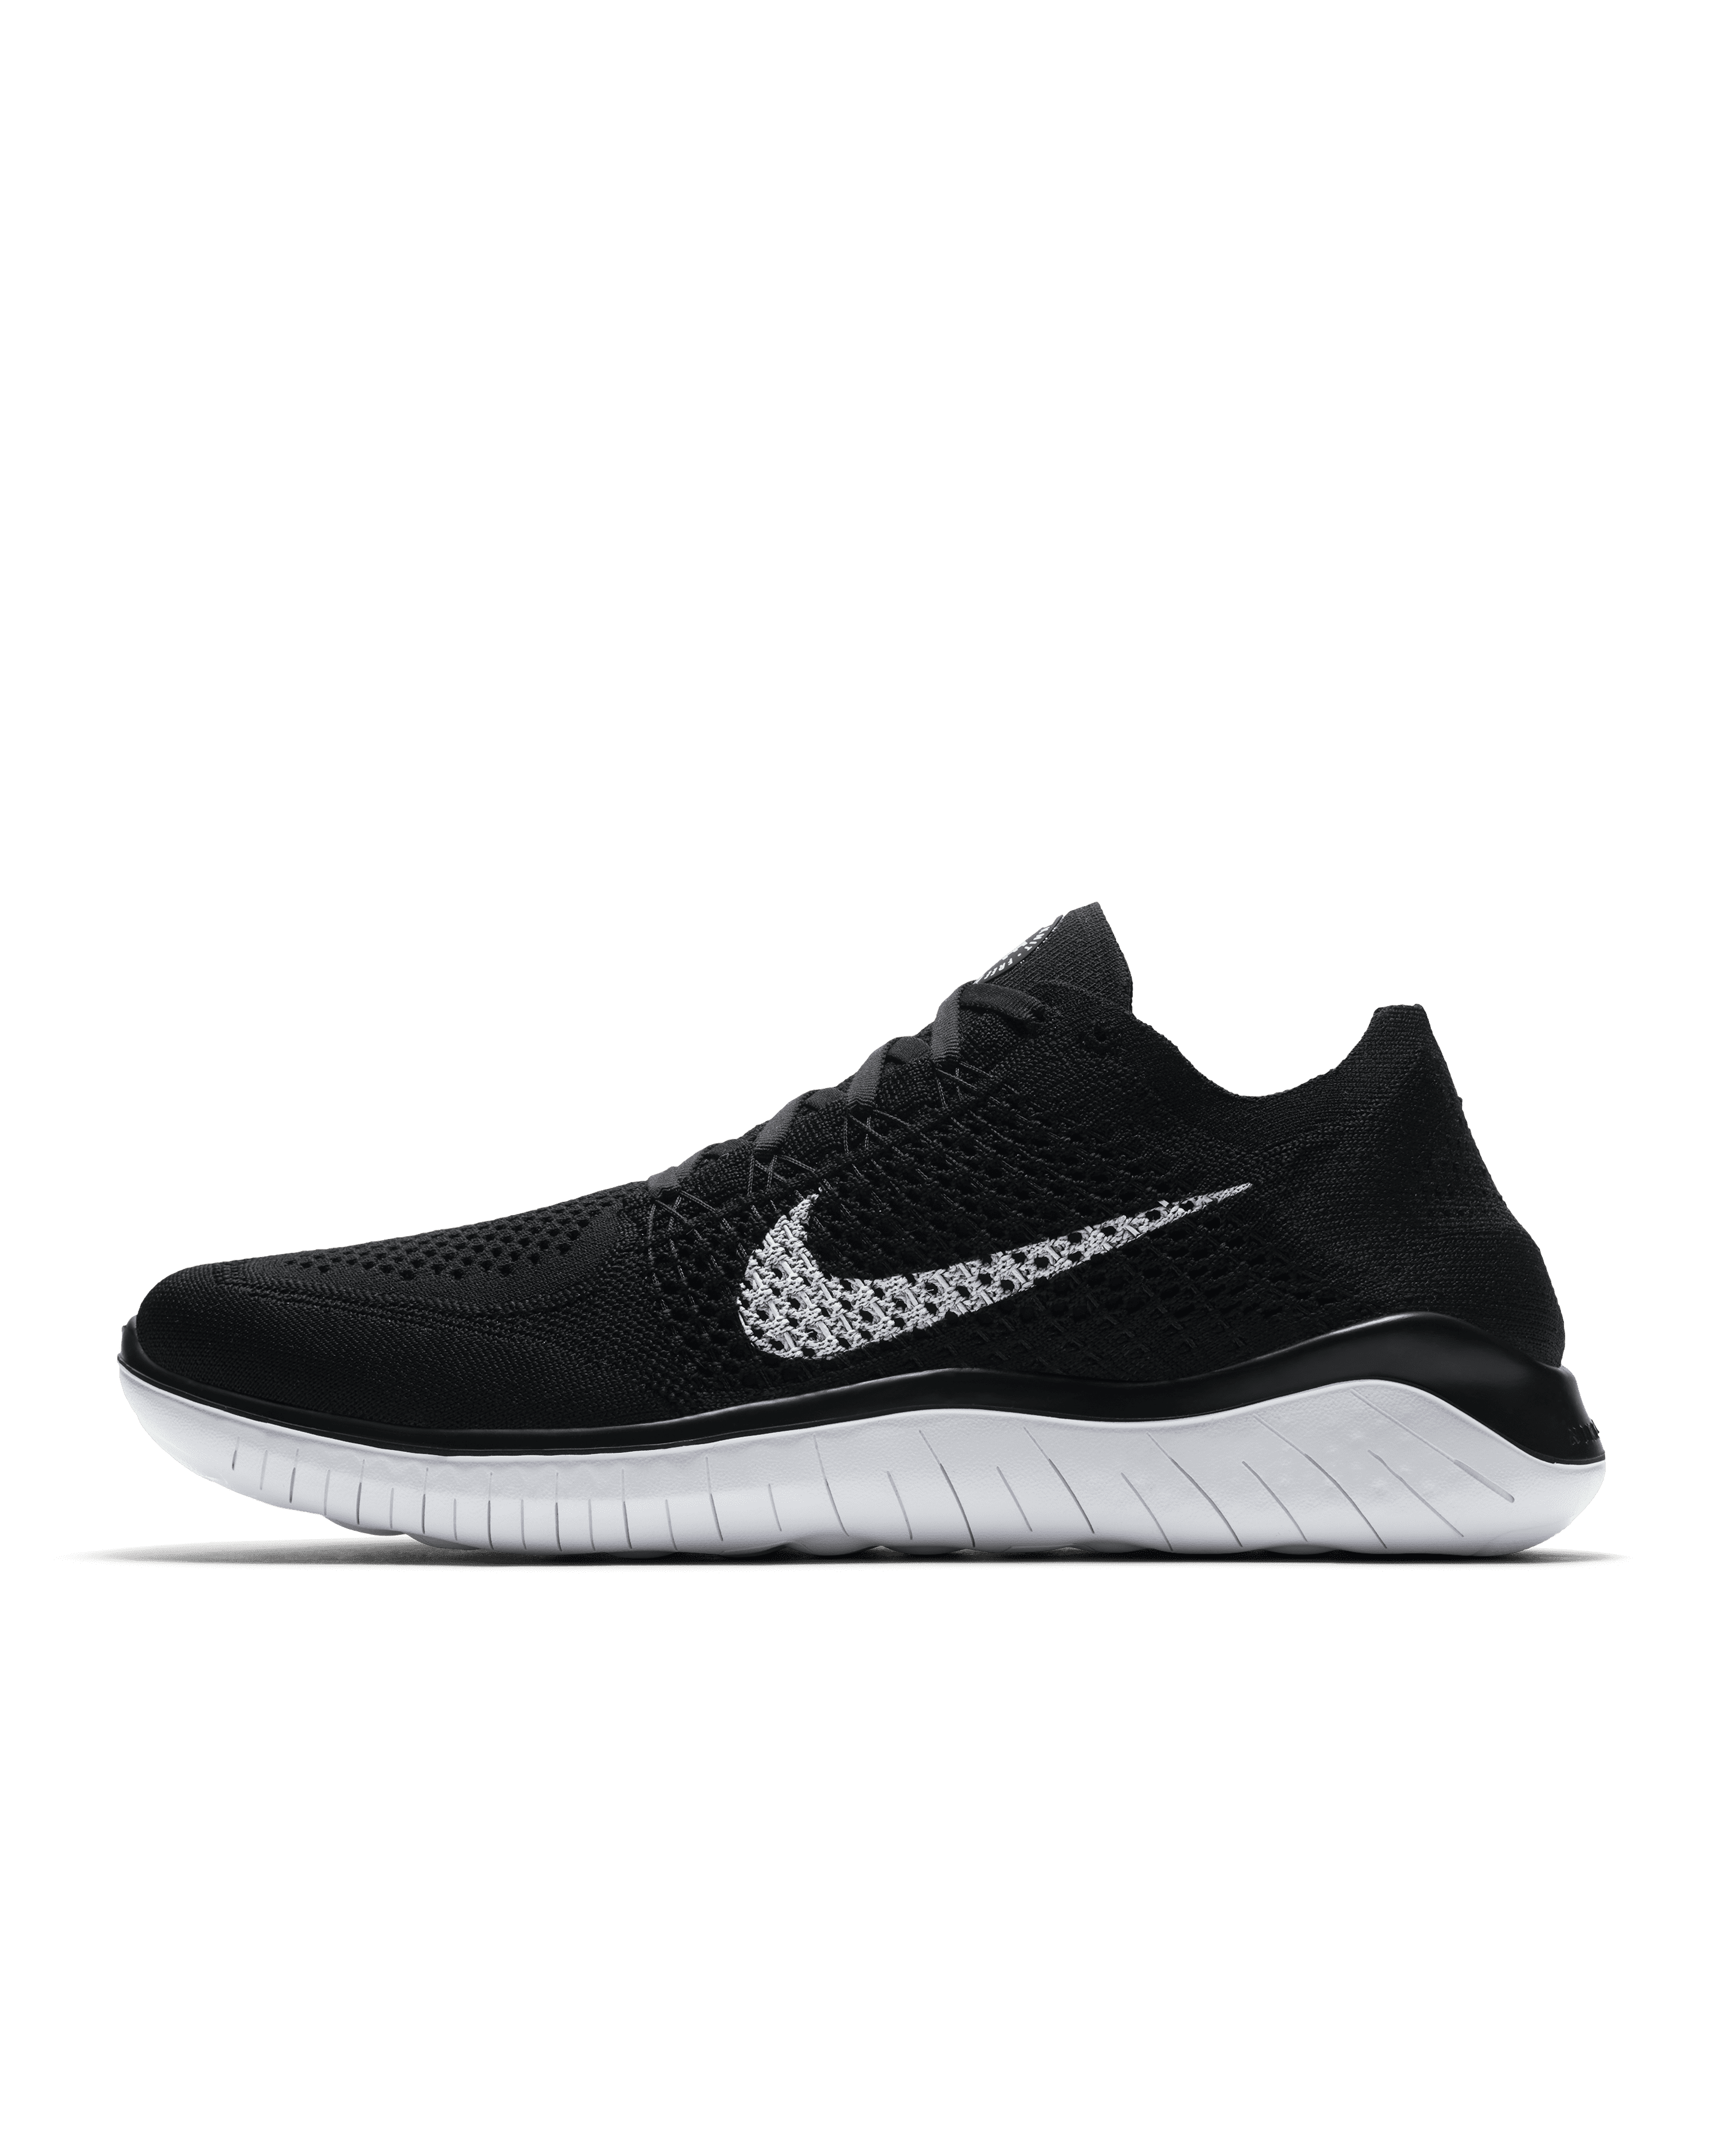 Free RN Flyknit 2018 Running Shoes